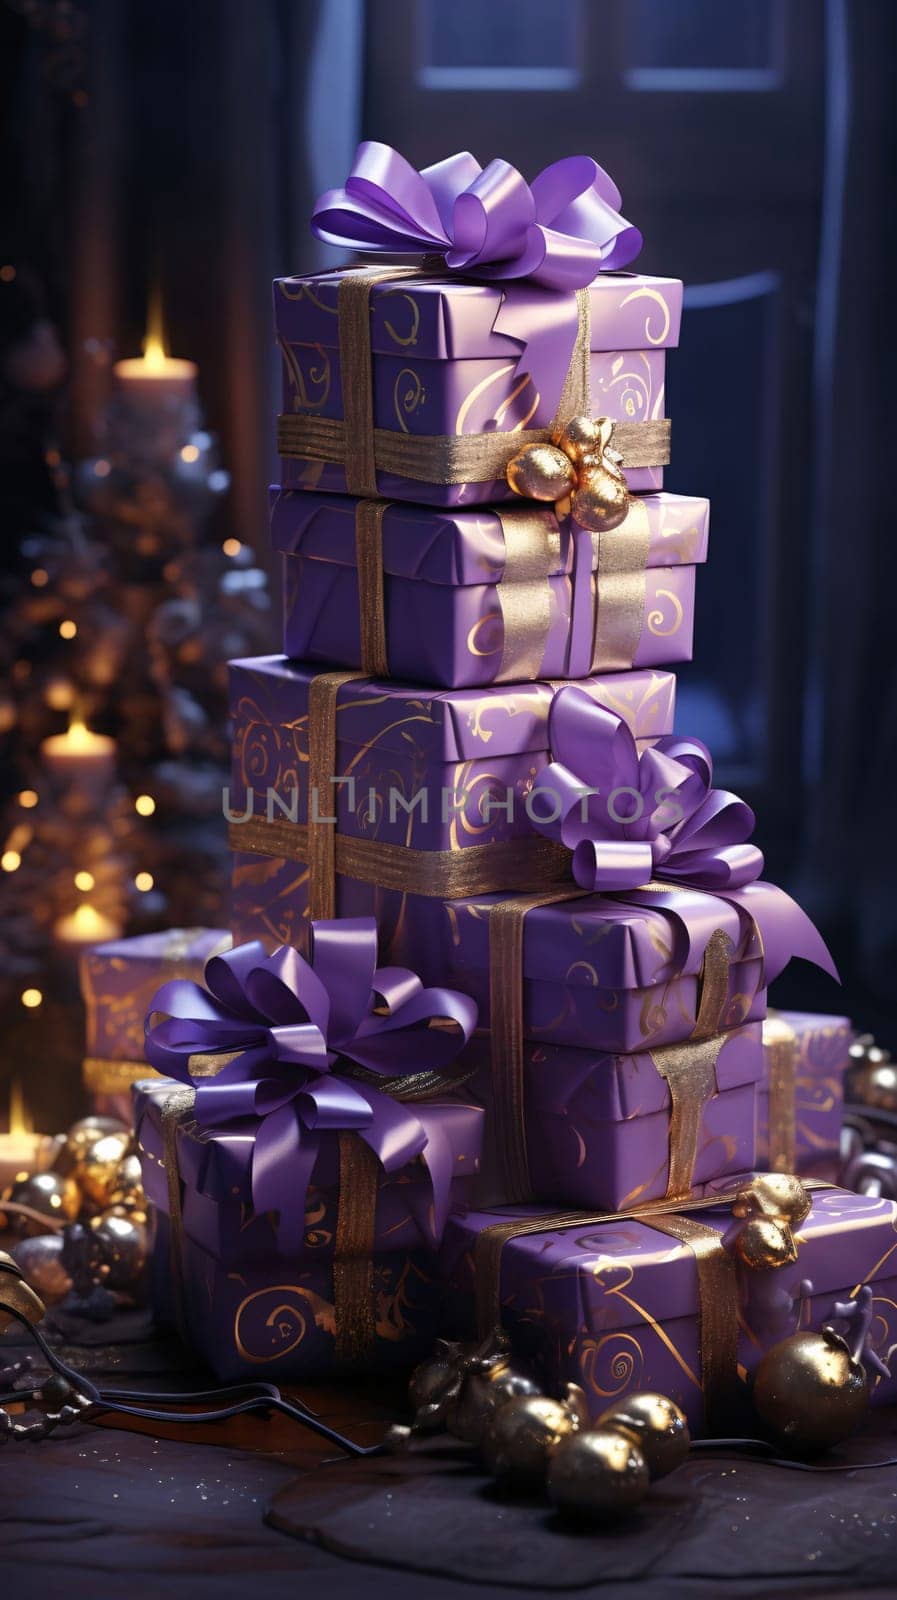 Stacked purple gifts with bows, Christmas tree baubles all around. Gifts as a day symbol of present and love. A time of falling in love and love.